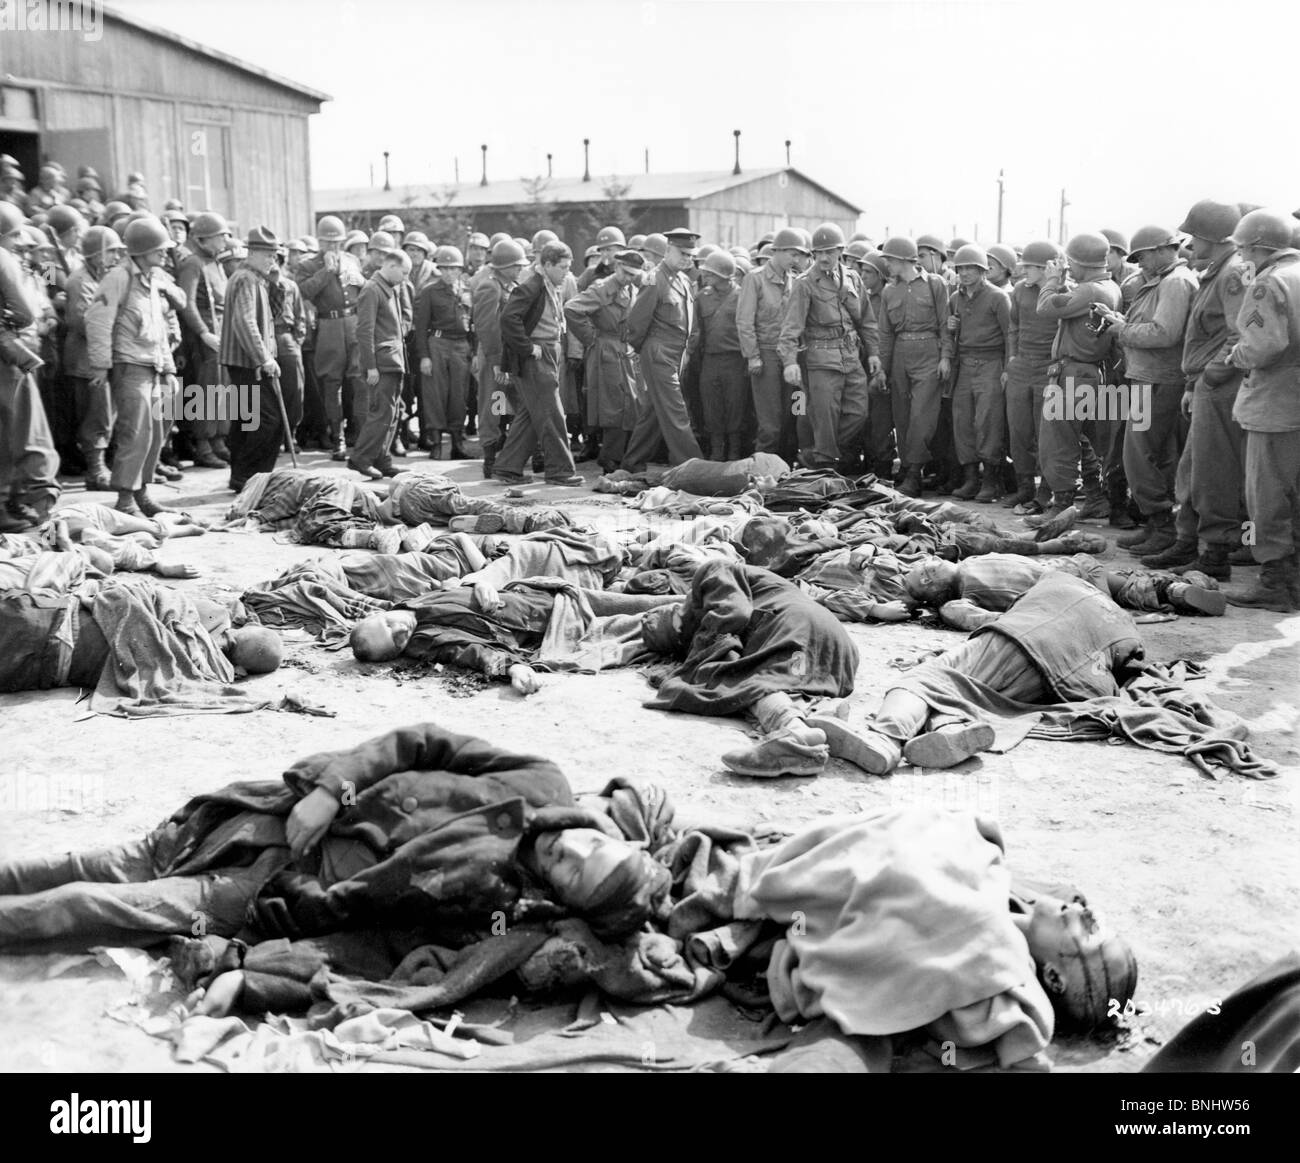 World War II Ohrdruf forced labor camp Buchenwald concentration camp Holocaust Germany April 1945 history historical historic Stock Photo